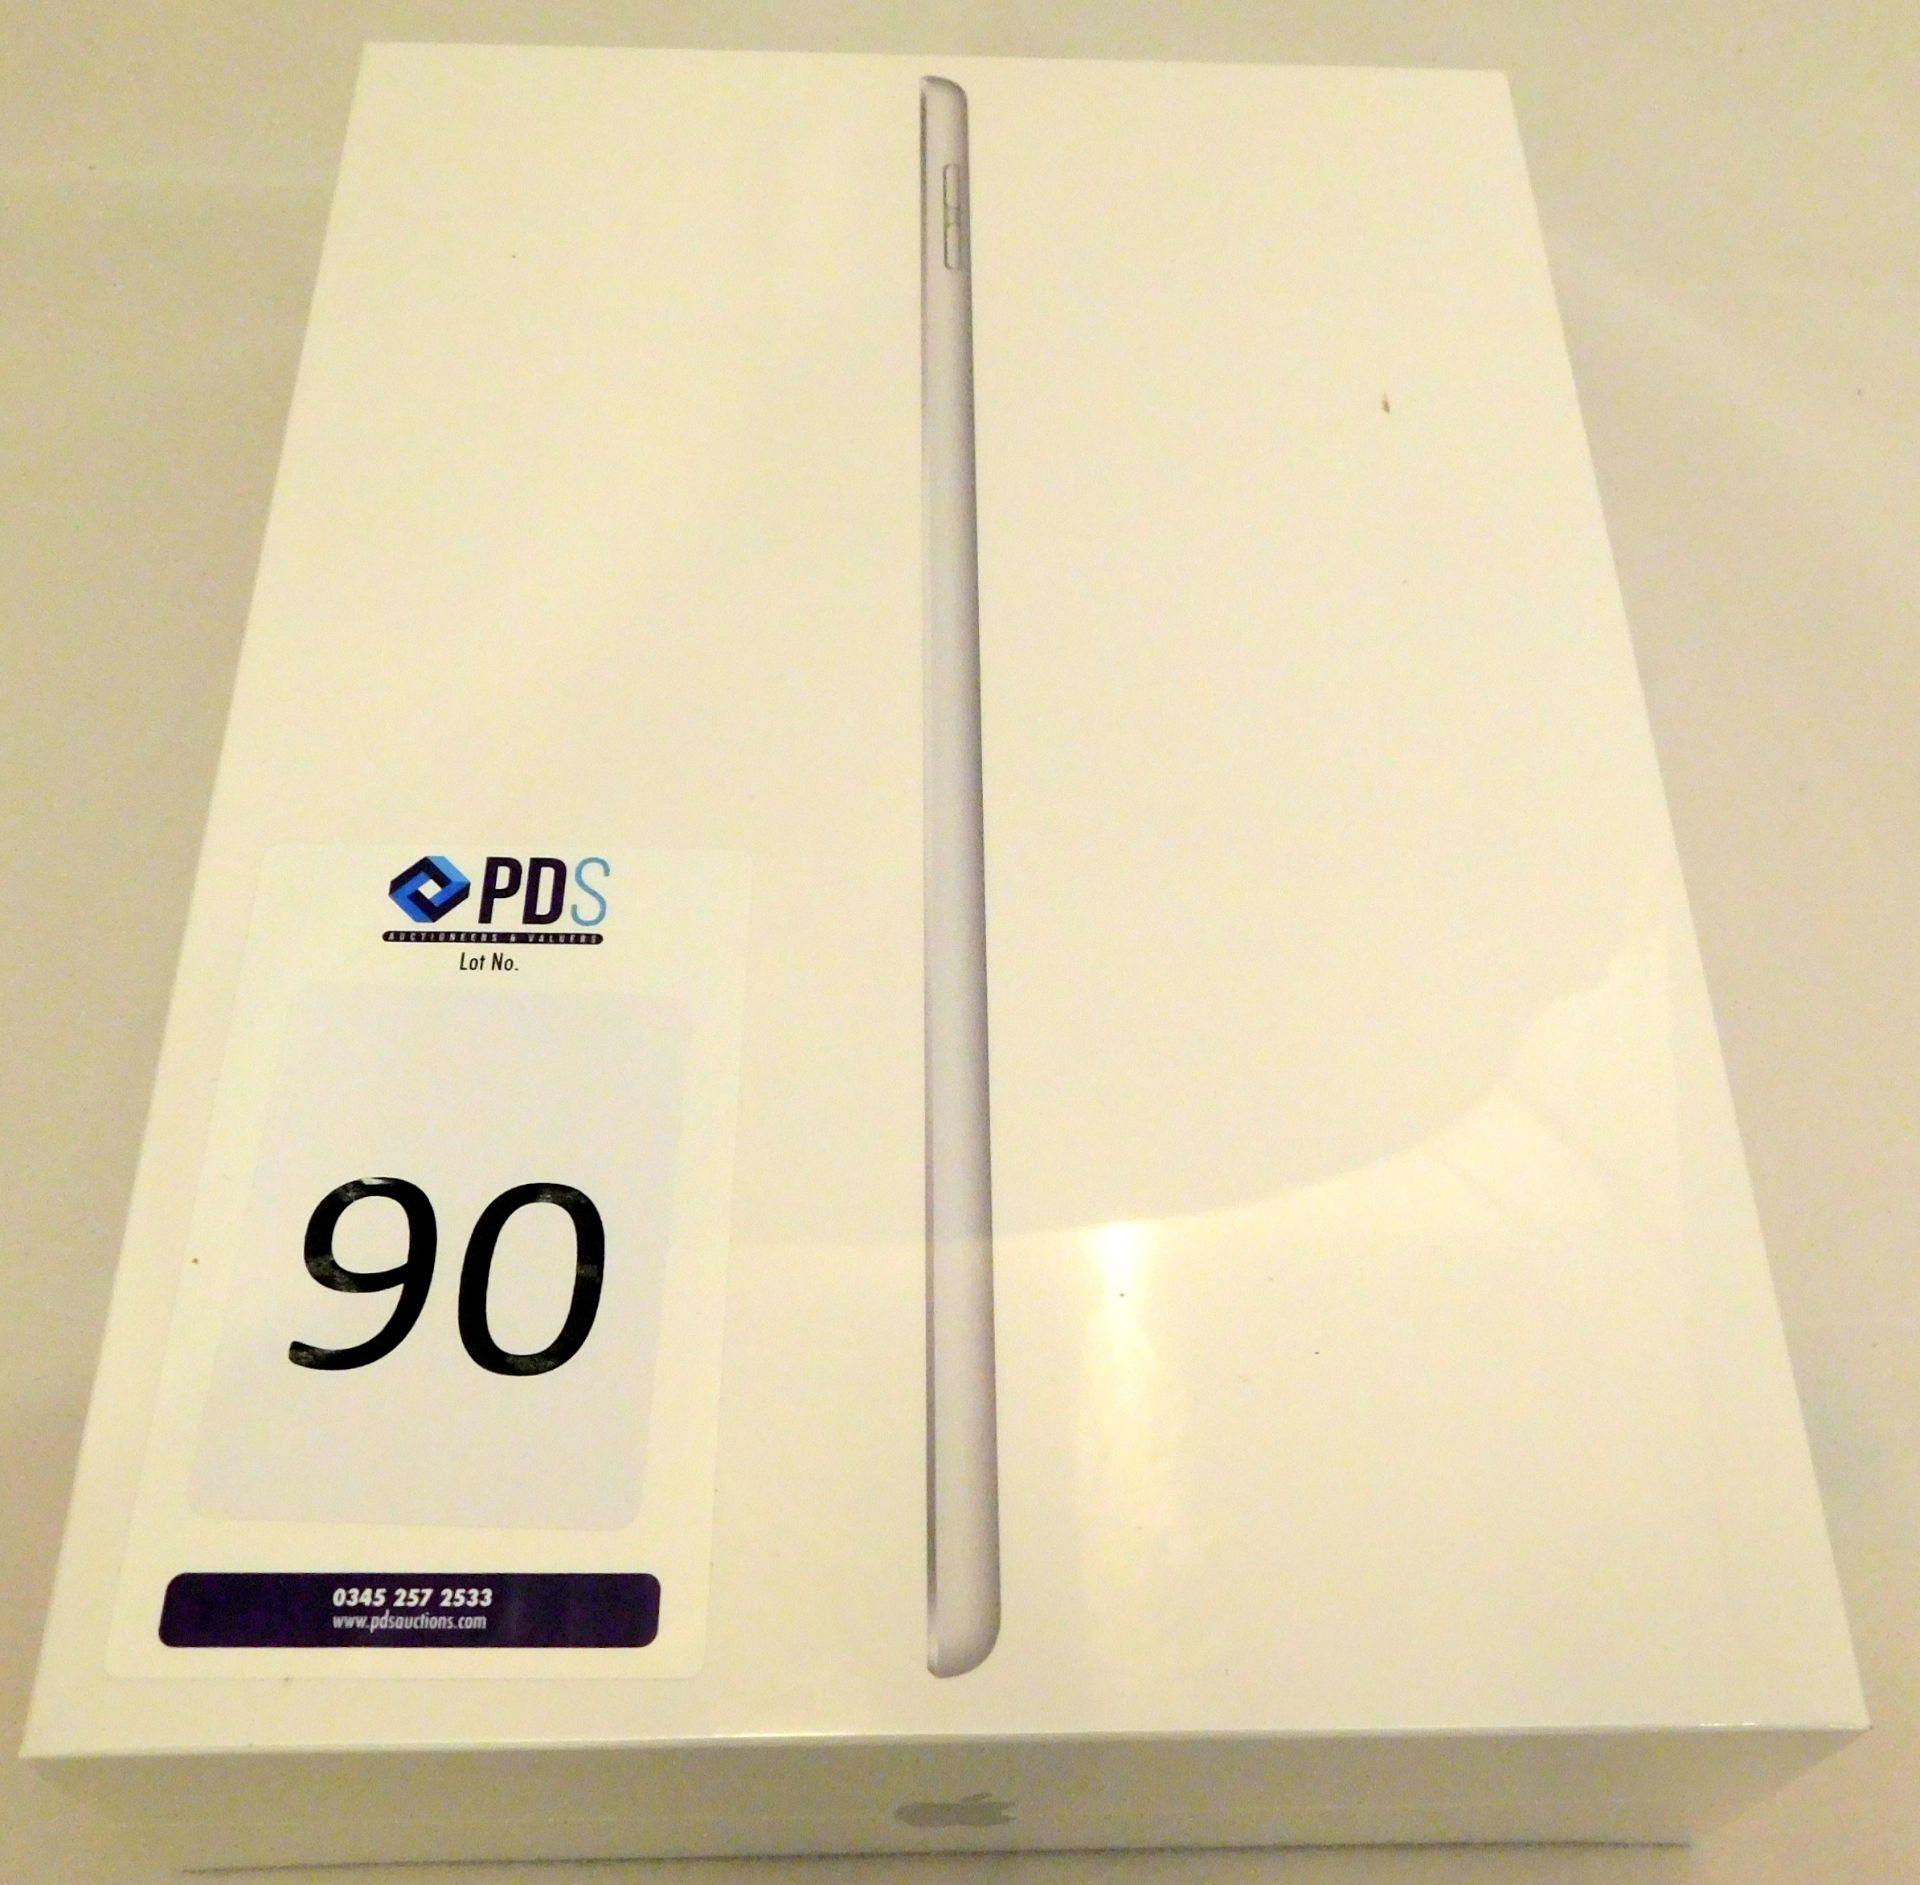 Apple A2197 iPad, 7th Gen, 32GB, Silver, Serial Number: DMPC80U6MF3N, (New in Sealed Box) (Located